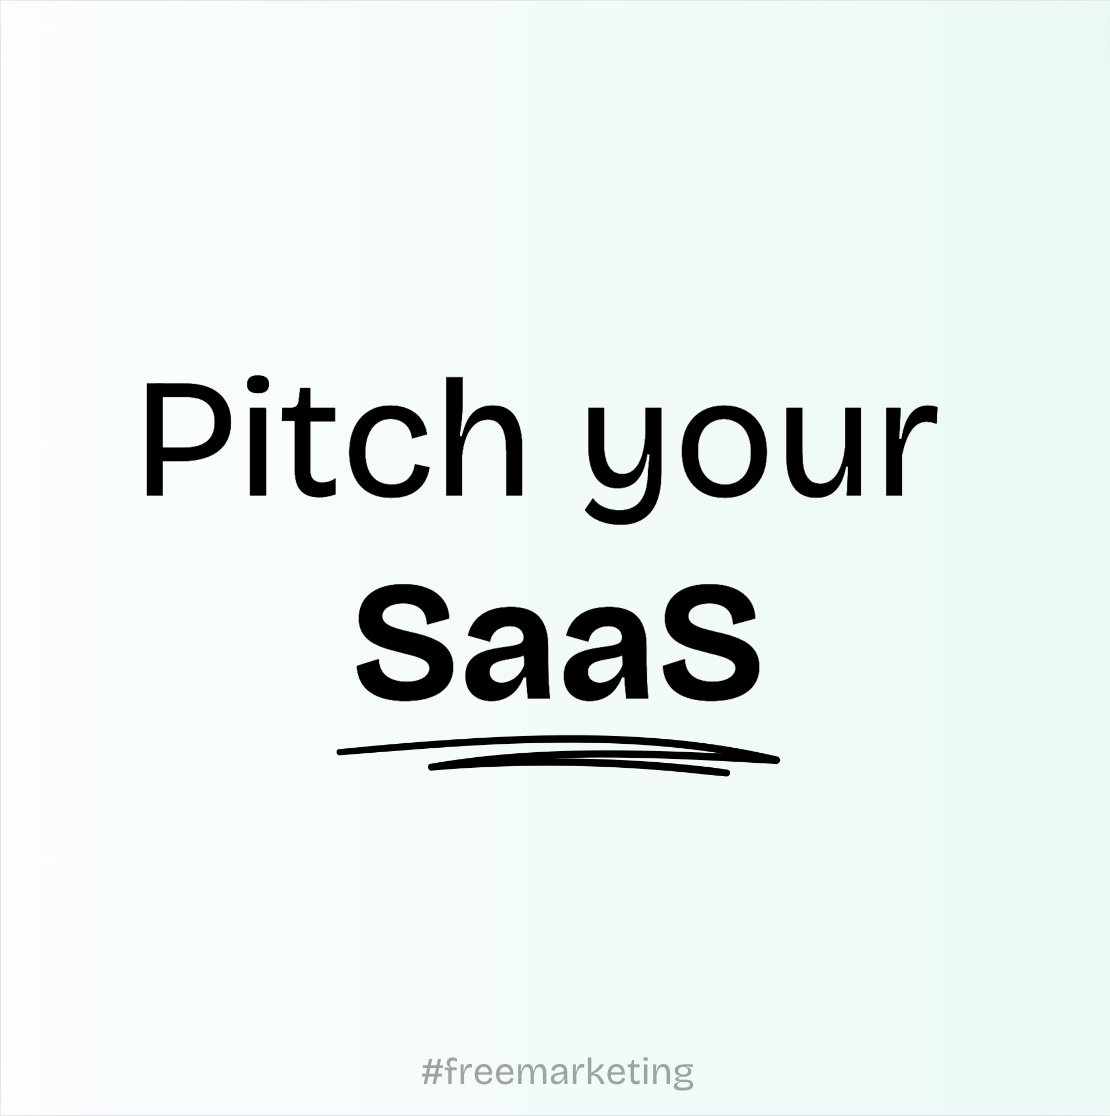 Pitch your SaaS 👇

- Name
- 1 Liner Pitch
- Target Audience 

Give your SaaS the visibility it deserves :)

#buildinpublic #indiehackers